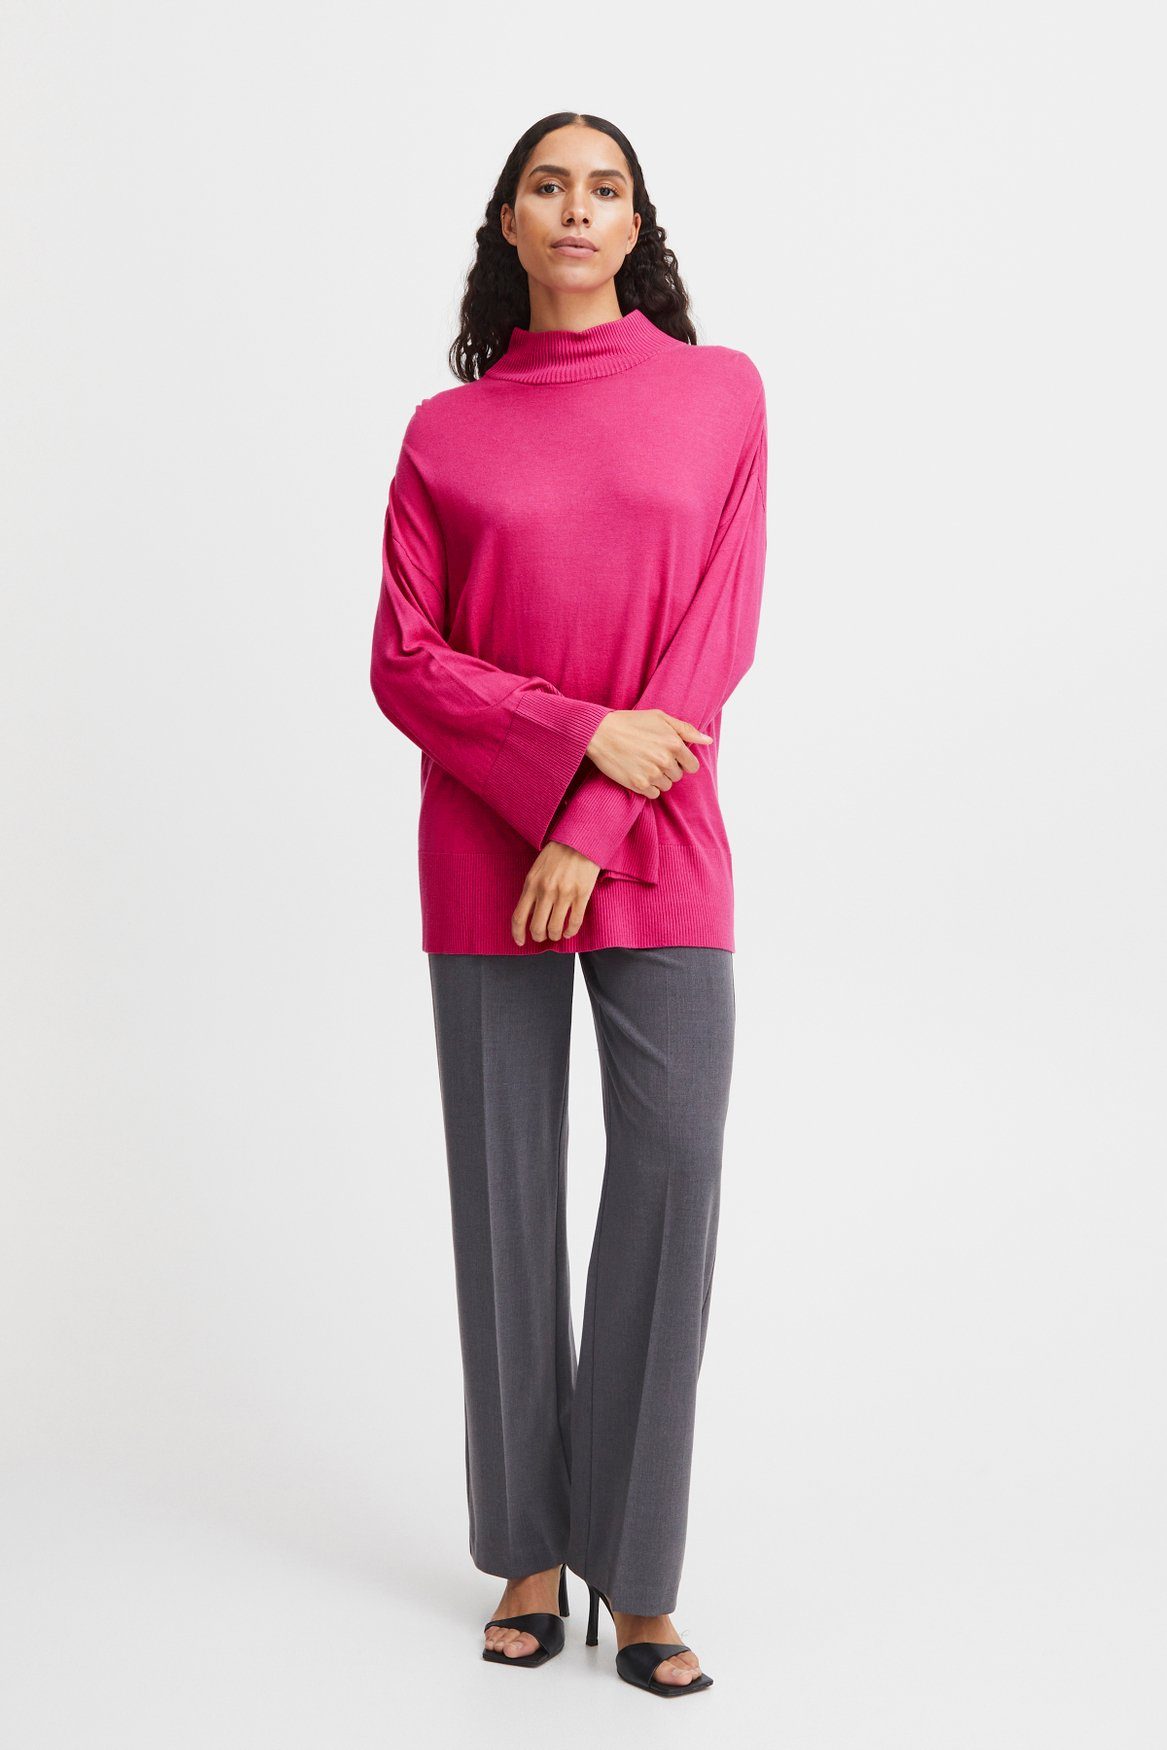 Feinstrick Langarm BYMMPIMBA1 Pink b.young 6263 Shirt in Pullover Strickpullover